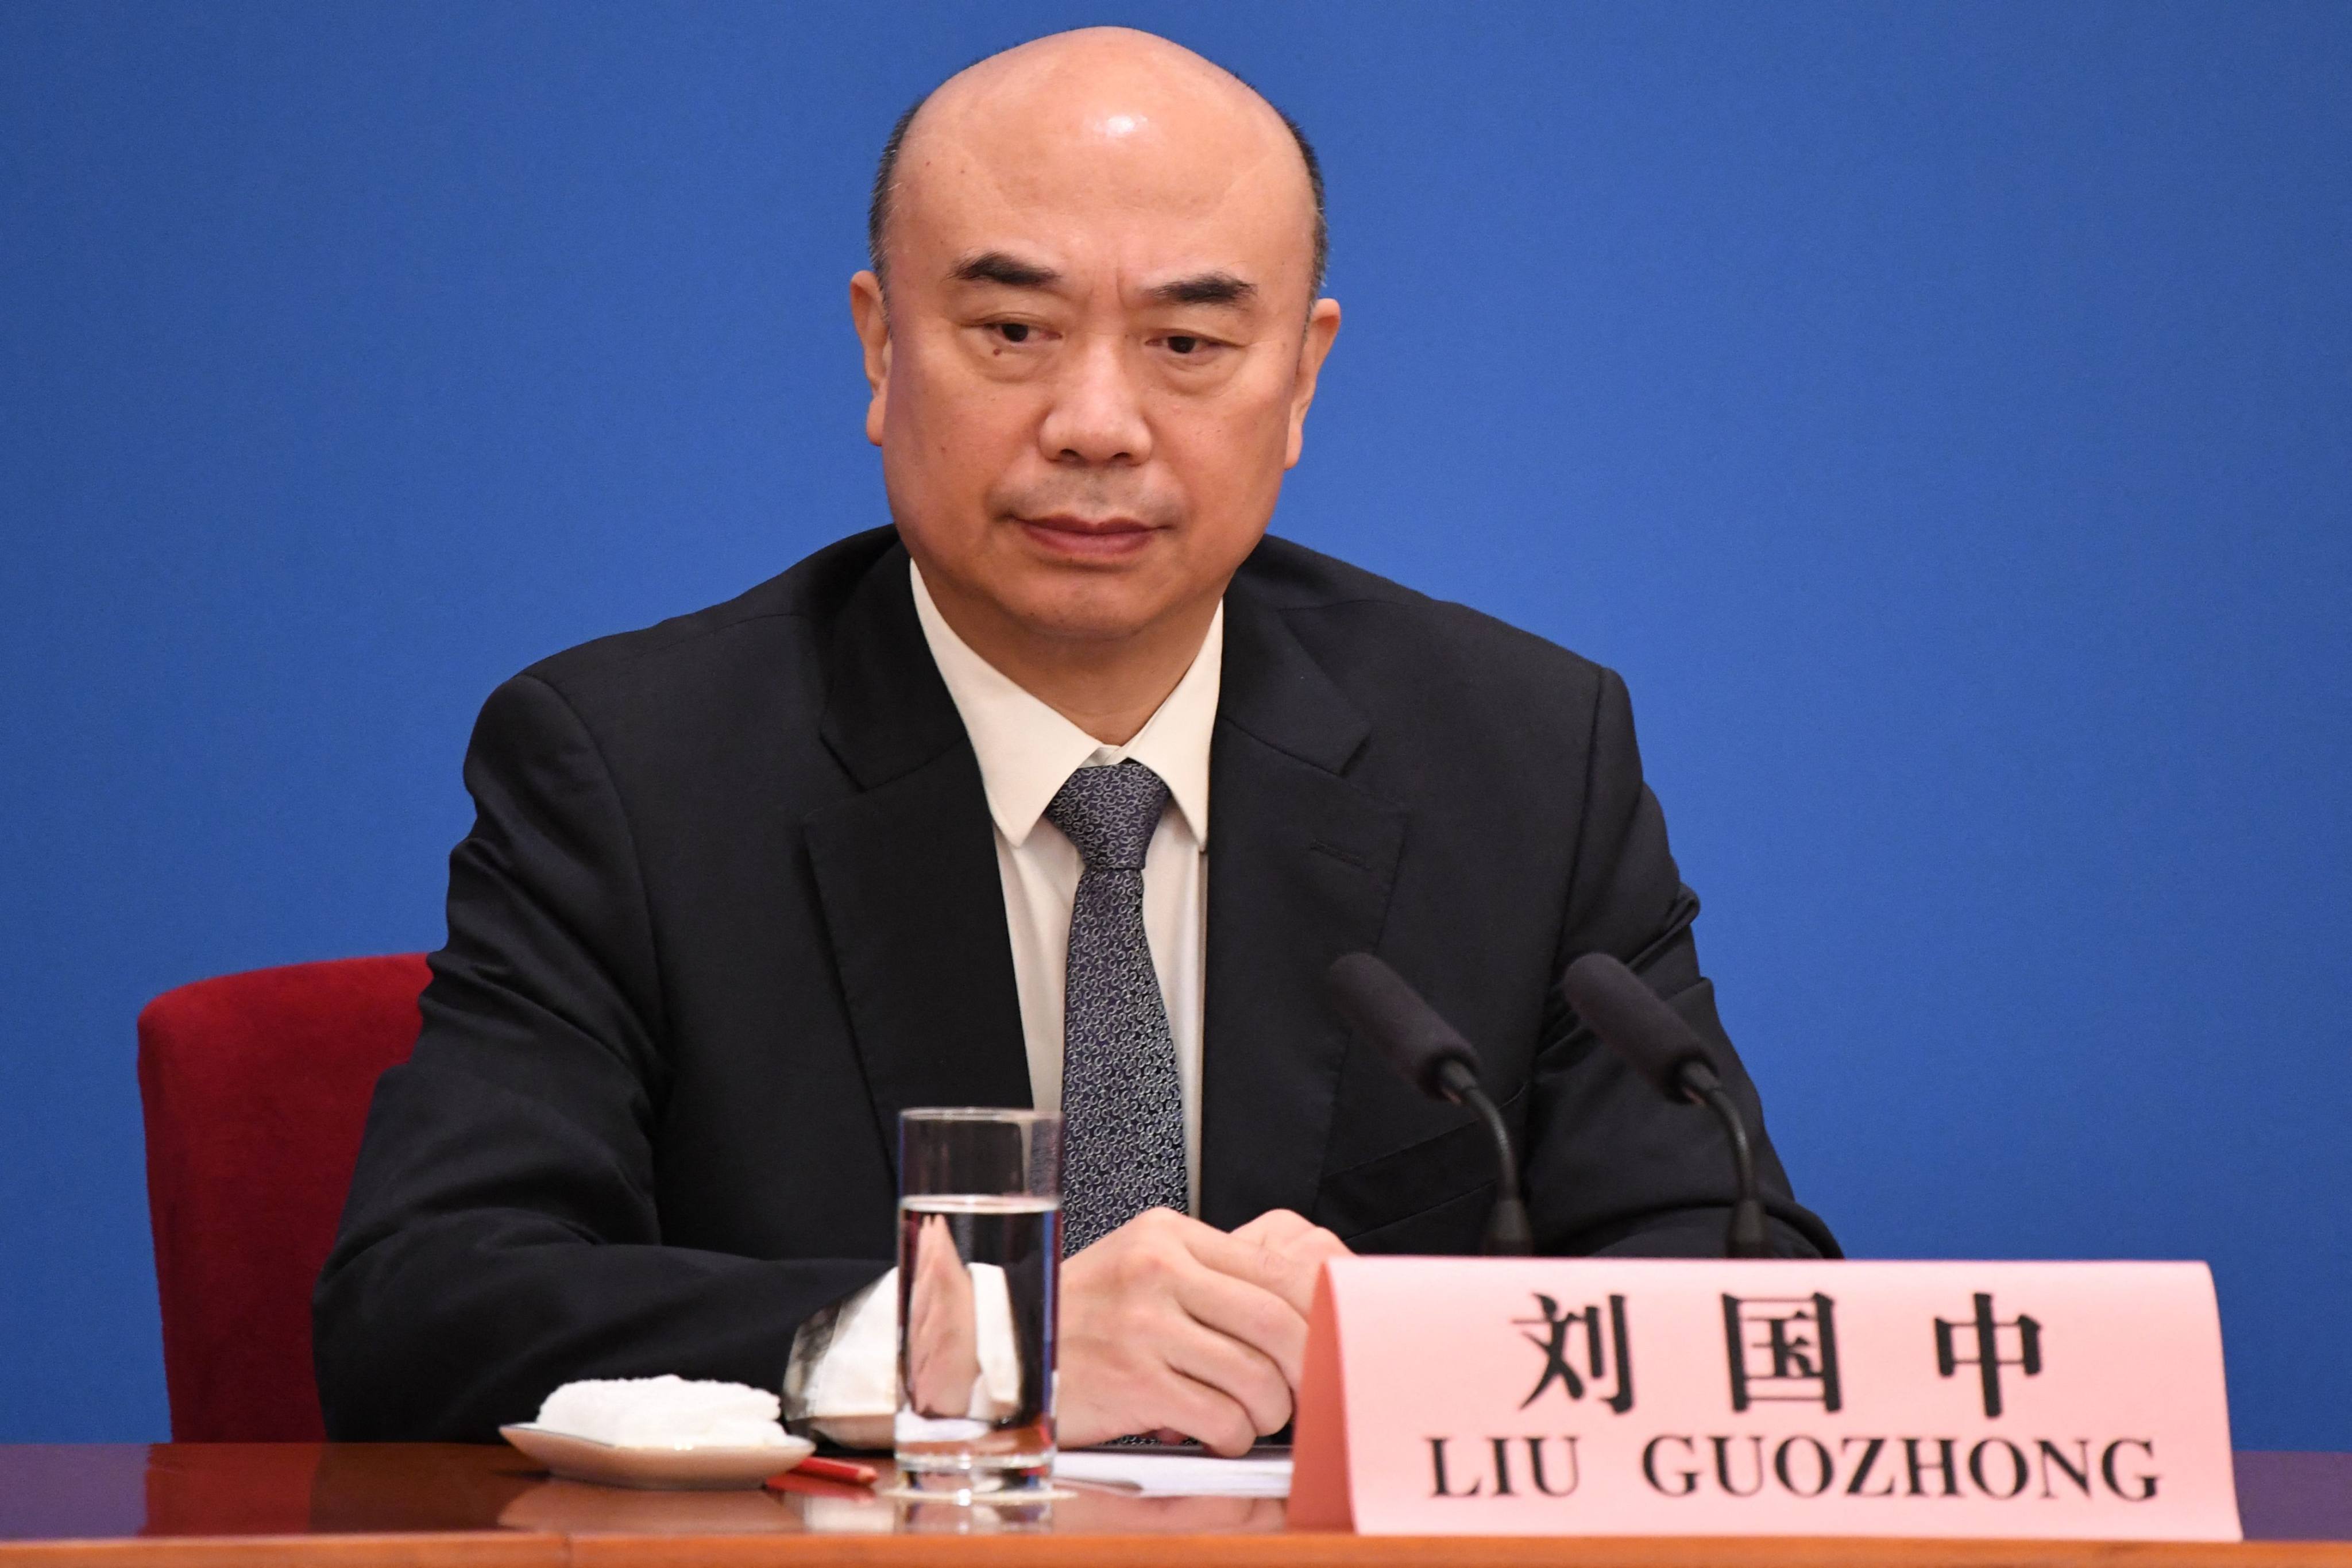 China’s vice-premier Liu Guozhong has begun work on agricultural affairs and is now responsible for the nation’s food security. Photo: AFP